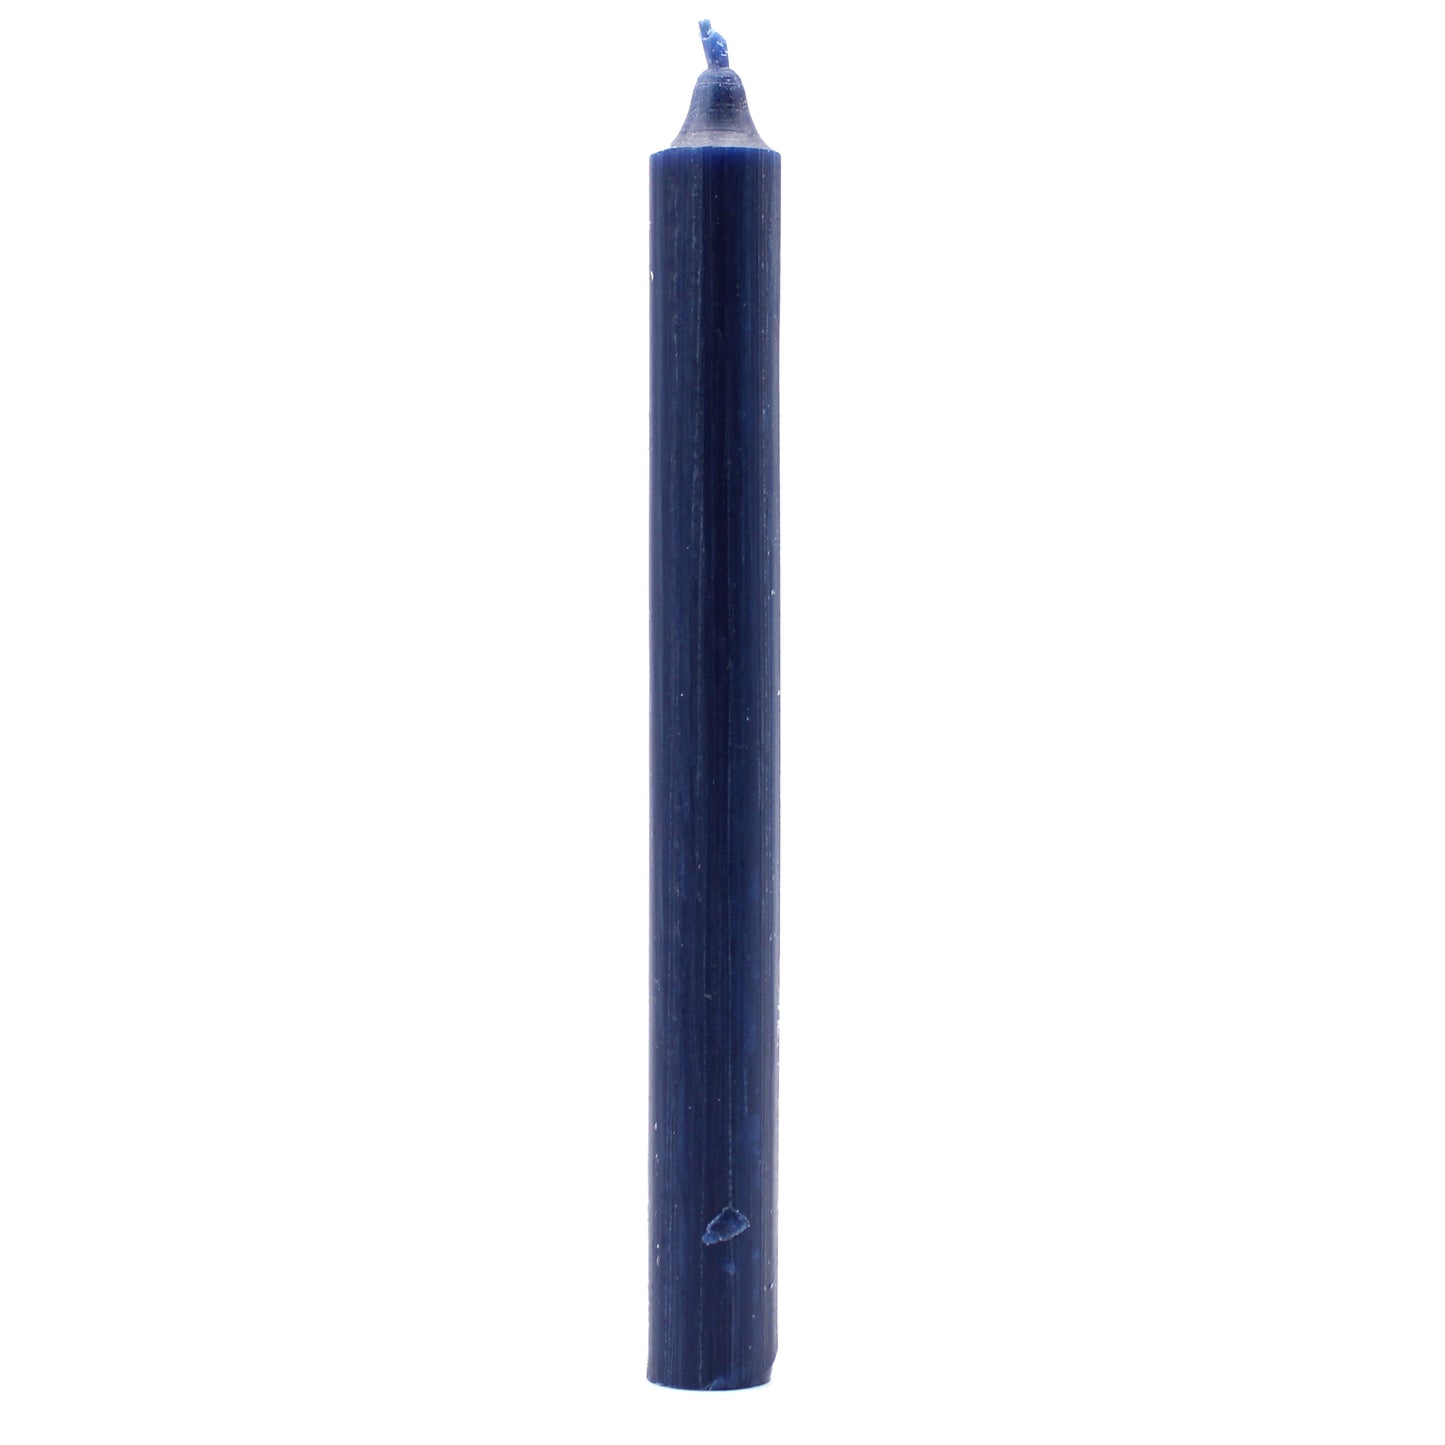 Solid Colour Dinner Candles - Rustic Navy - Pack of 5